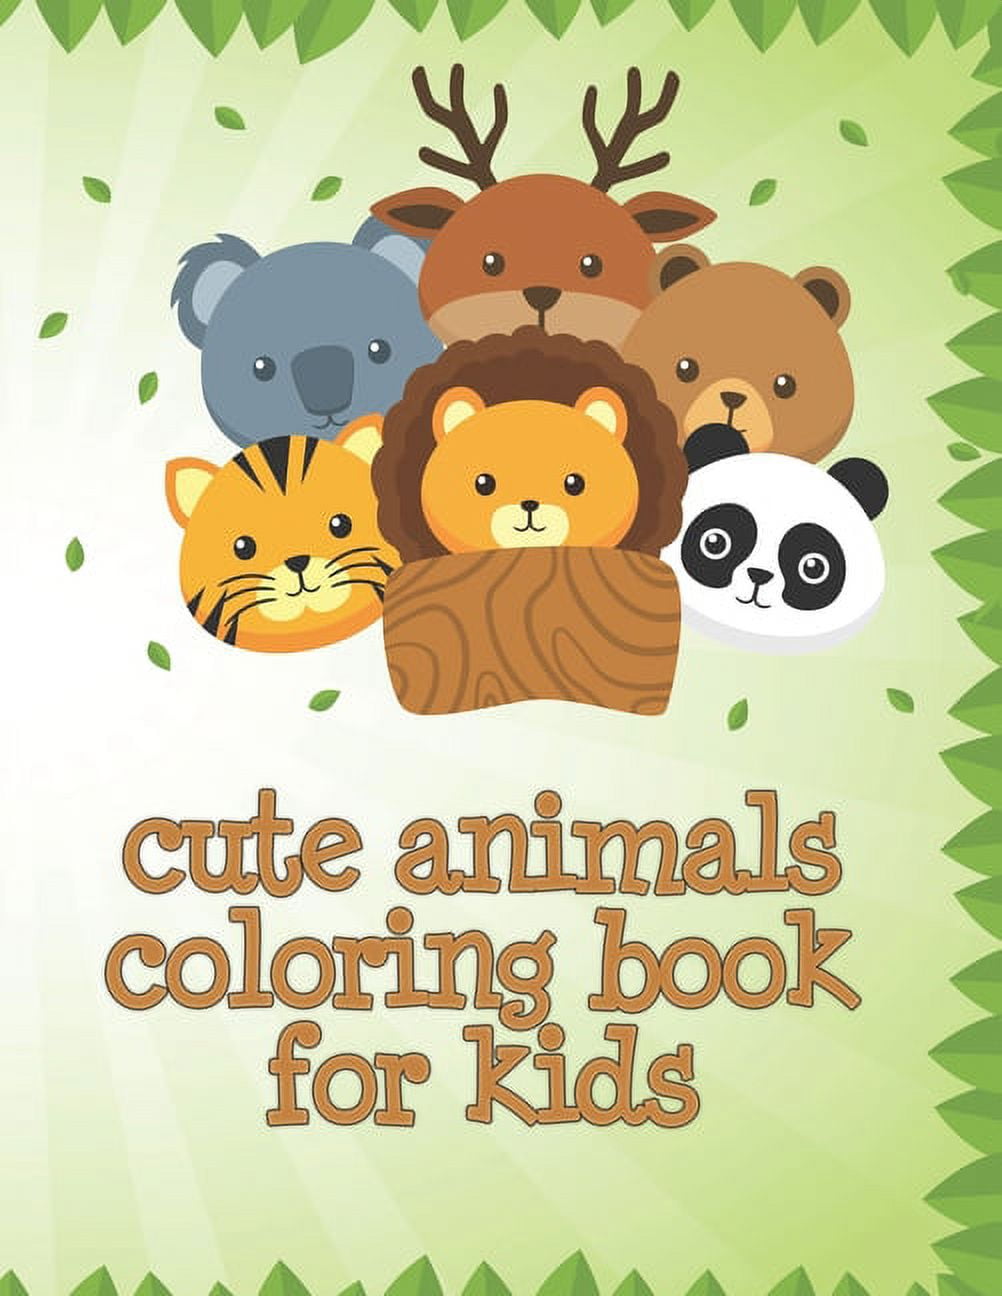 Cute Animals Coloring Book For Kids: The First Toddler Coloring Book for Kids Pre-K, Preschool, and Kindergarten (Cute, Animal, Dog, Cat, Elephant, Rabbit, Owls, Bears, Kids Coloring Books Ages 2-4, 4-8, 9-12) Easy to Take Along Everywhere [Book]